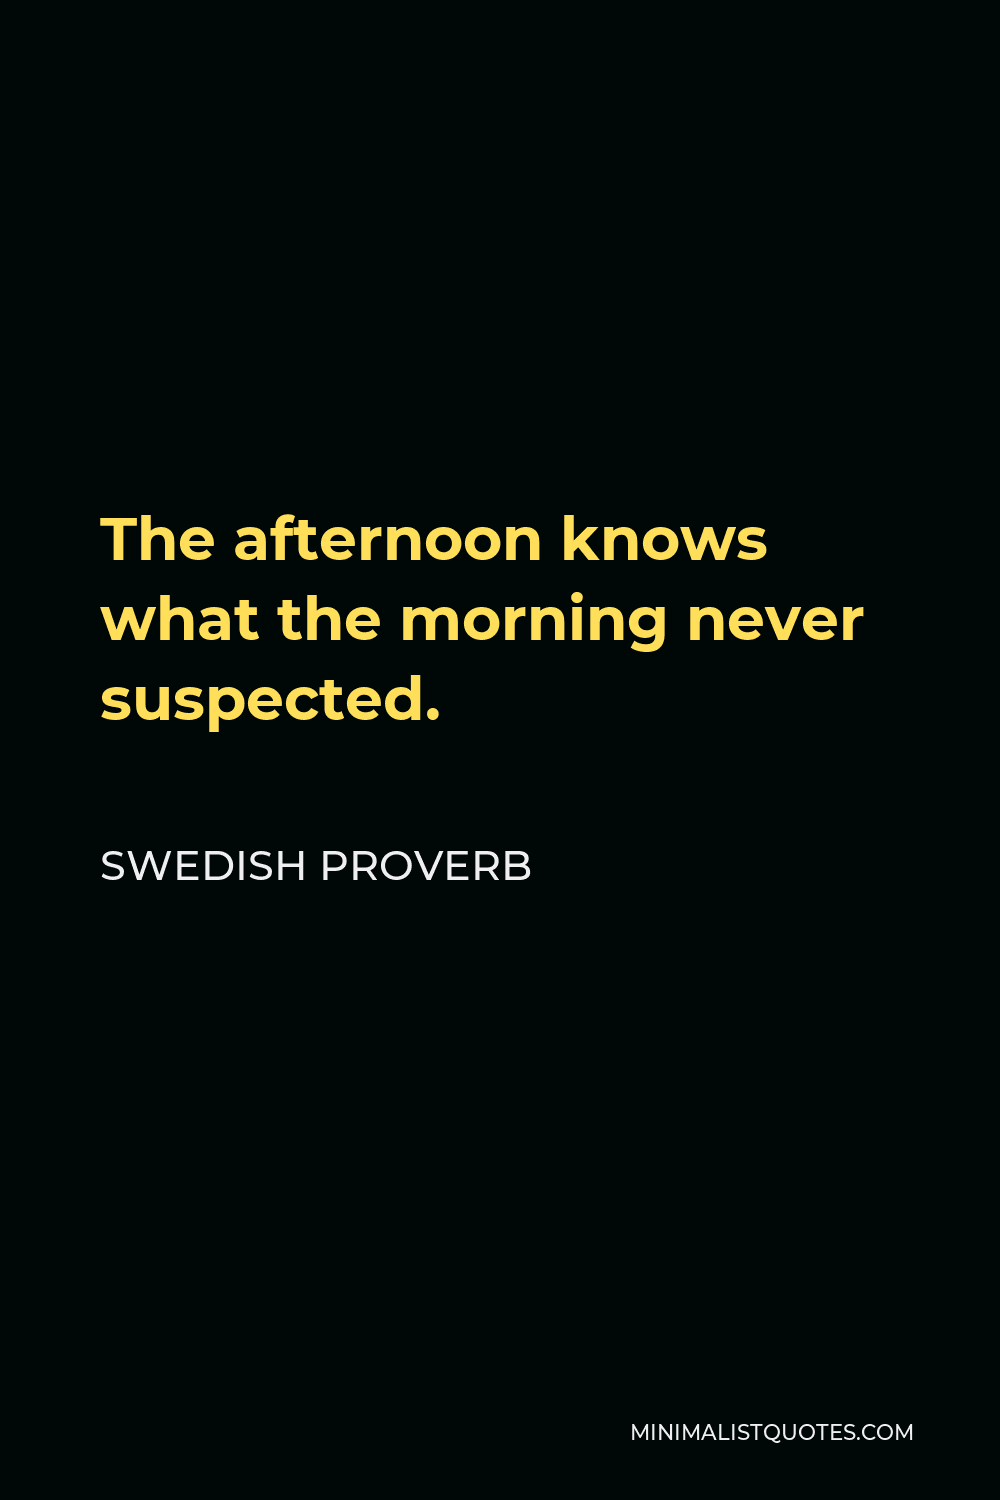 Swedish Proverb Quote - The afternoon knows what the morning never suspected.